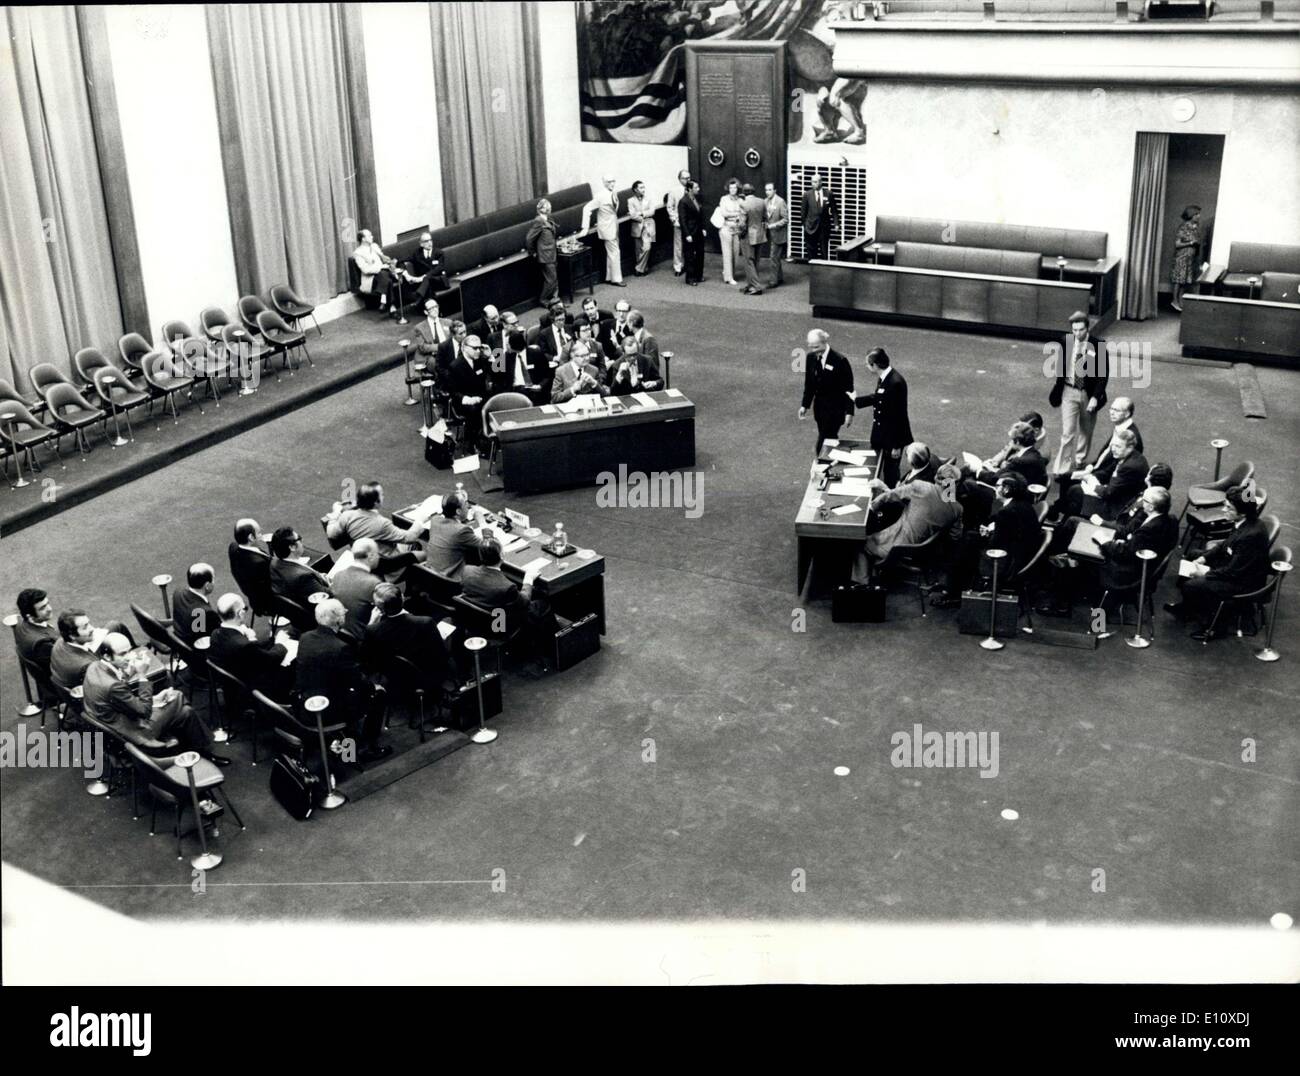 Jul. 26, 1974 - Geneva Talks on Cyprus. OPS: a general view of the conference room with the Turkish left, the British middle, and the Greek right delegation. Stock Photo